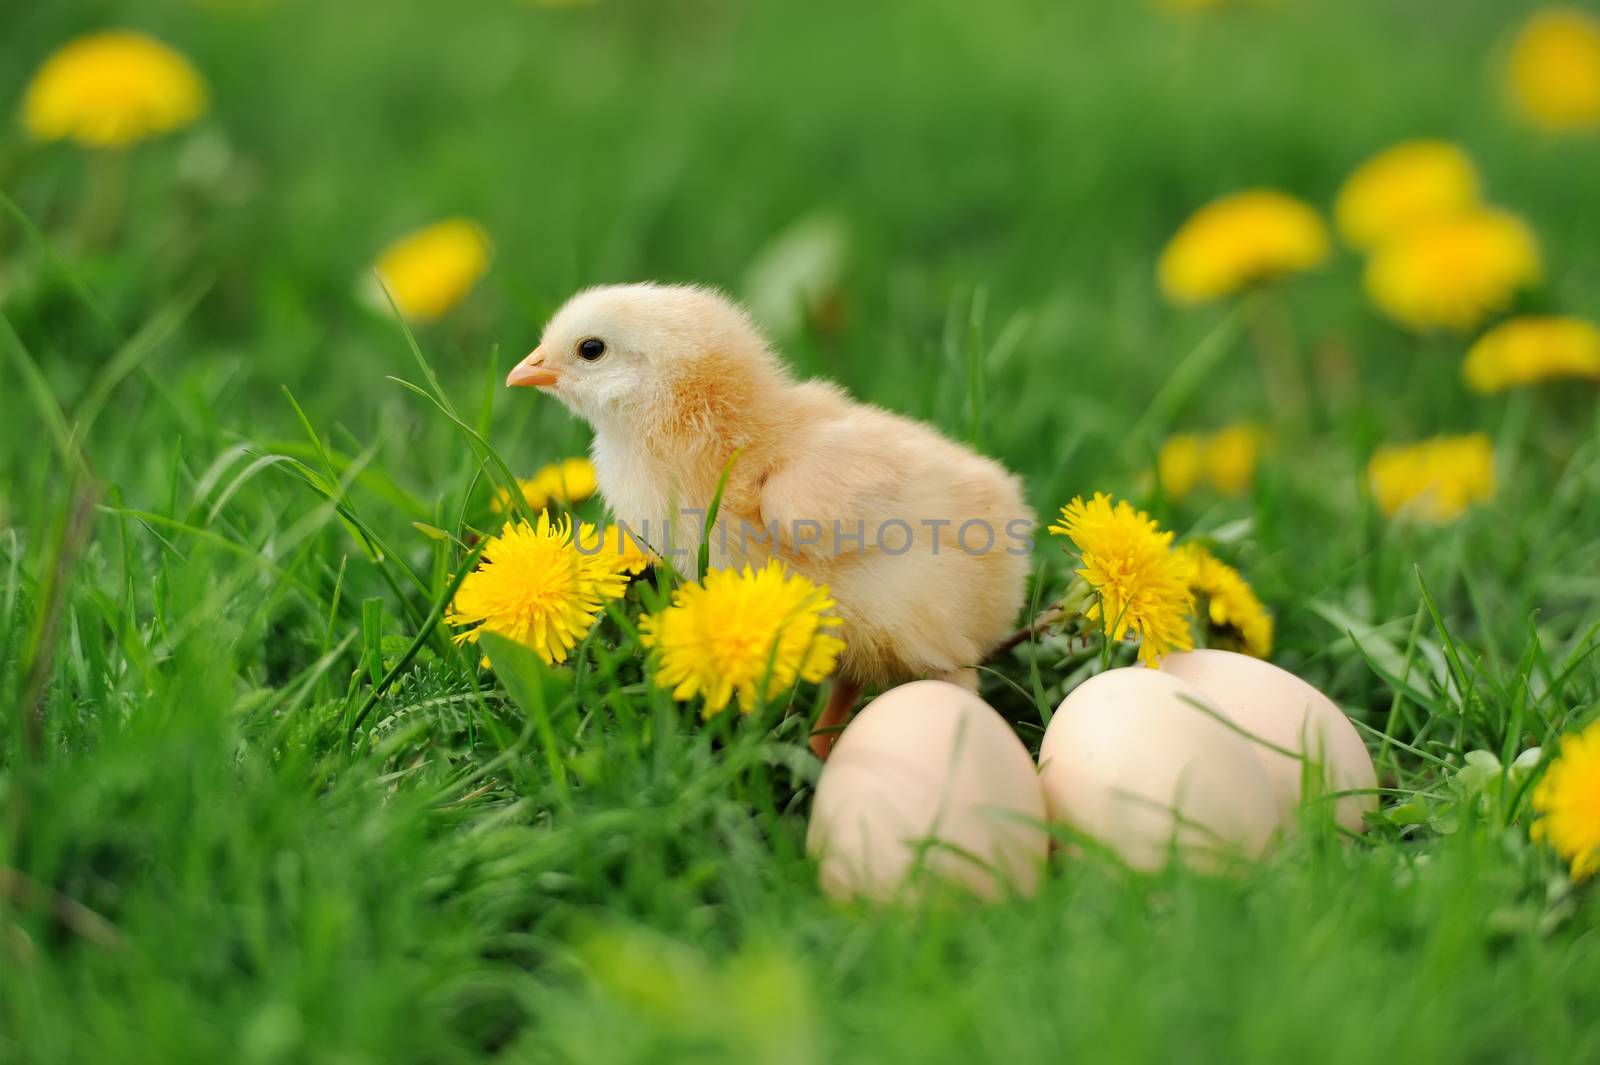 Little chicken and egg in the grass on a farm